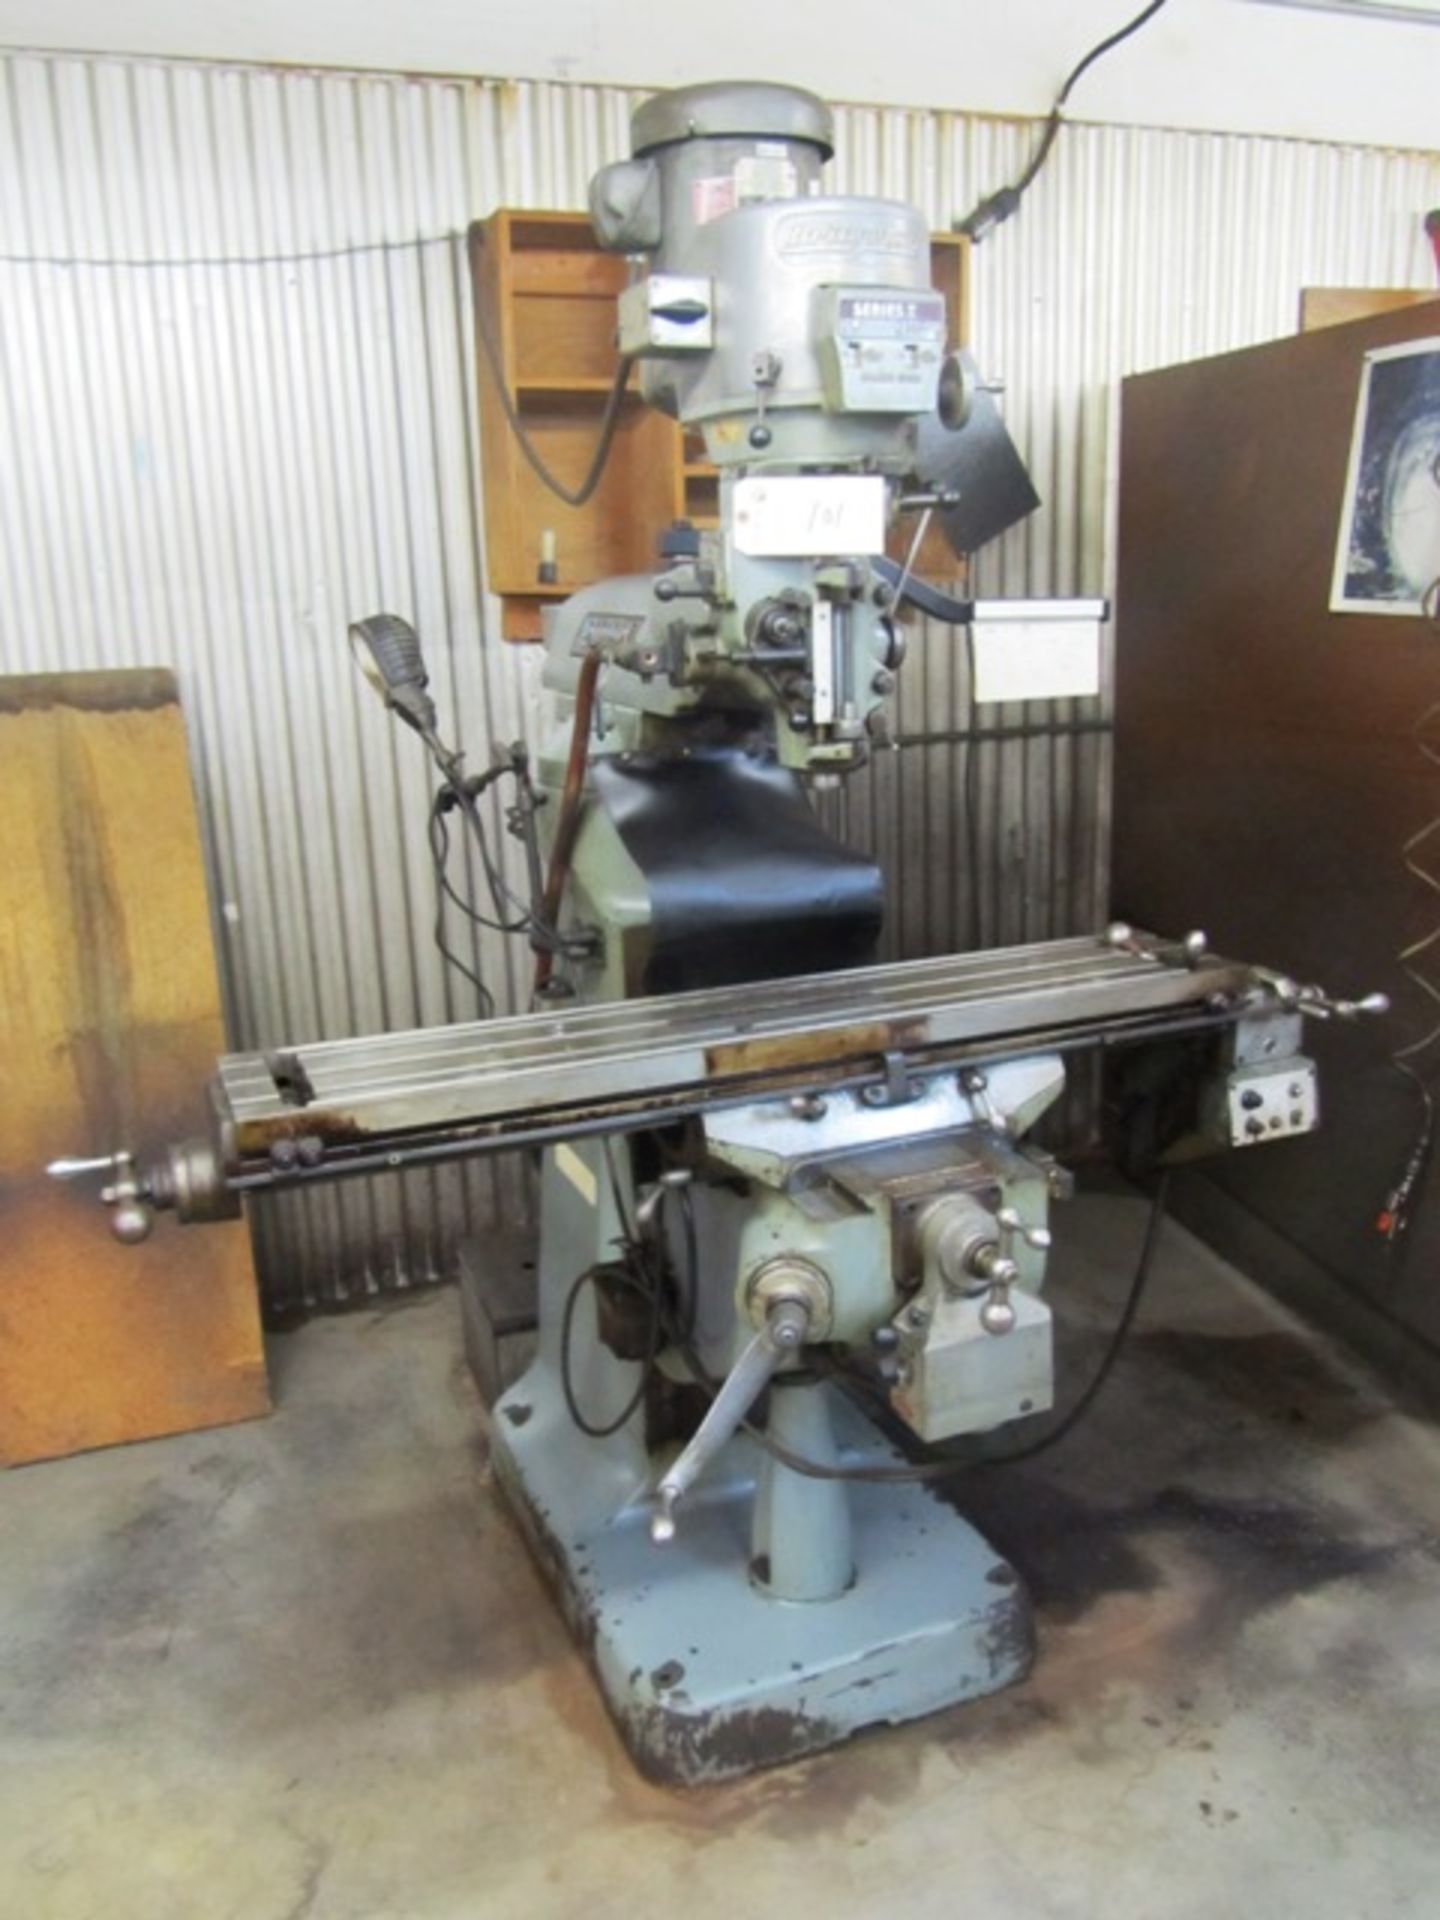 Bridgeport Vertical Milling Machine with 9'' x 48'' Powerfeed Table, R8 Taper, Spindle Speeds to